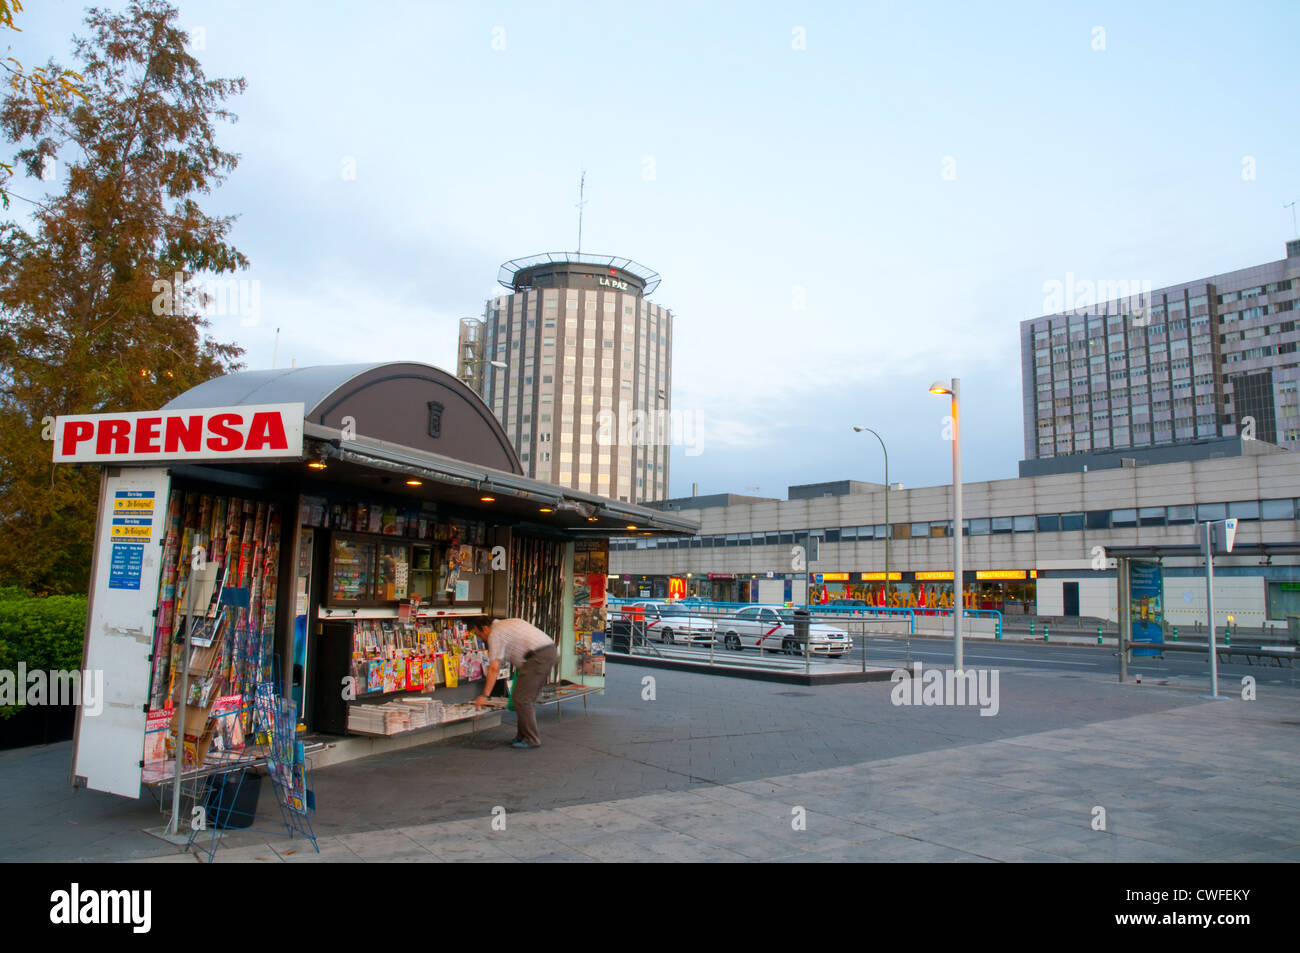 Newspaper stand and La Paz hospital at dawn. Madrid, Spain. Stock Photo